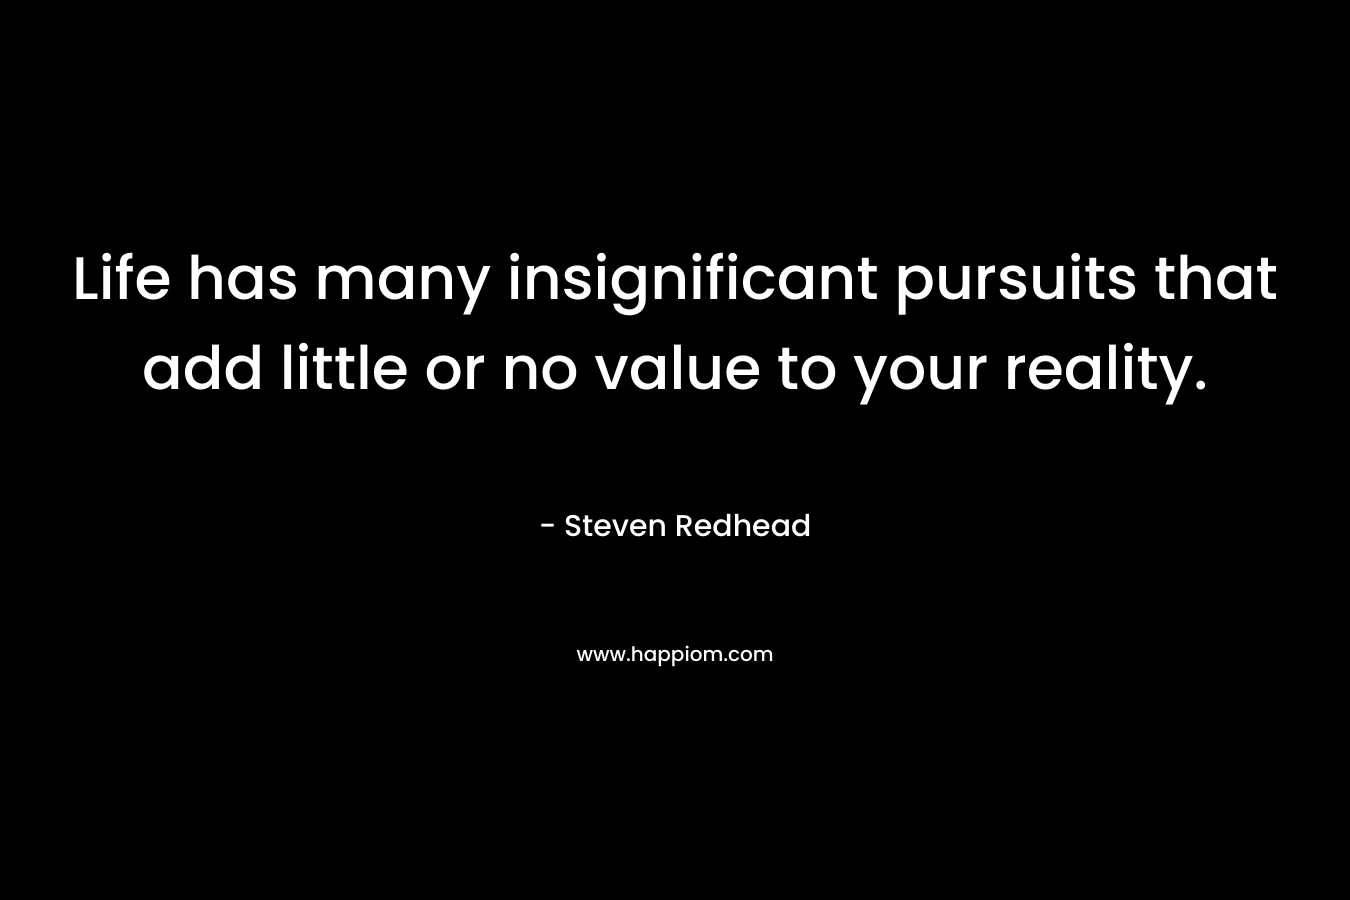 Life has many insignificant pursuits that add little or no value to your reality. – Steven Redhead